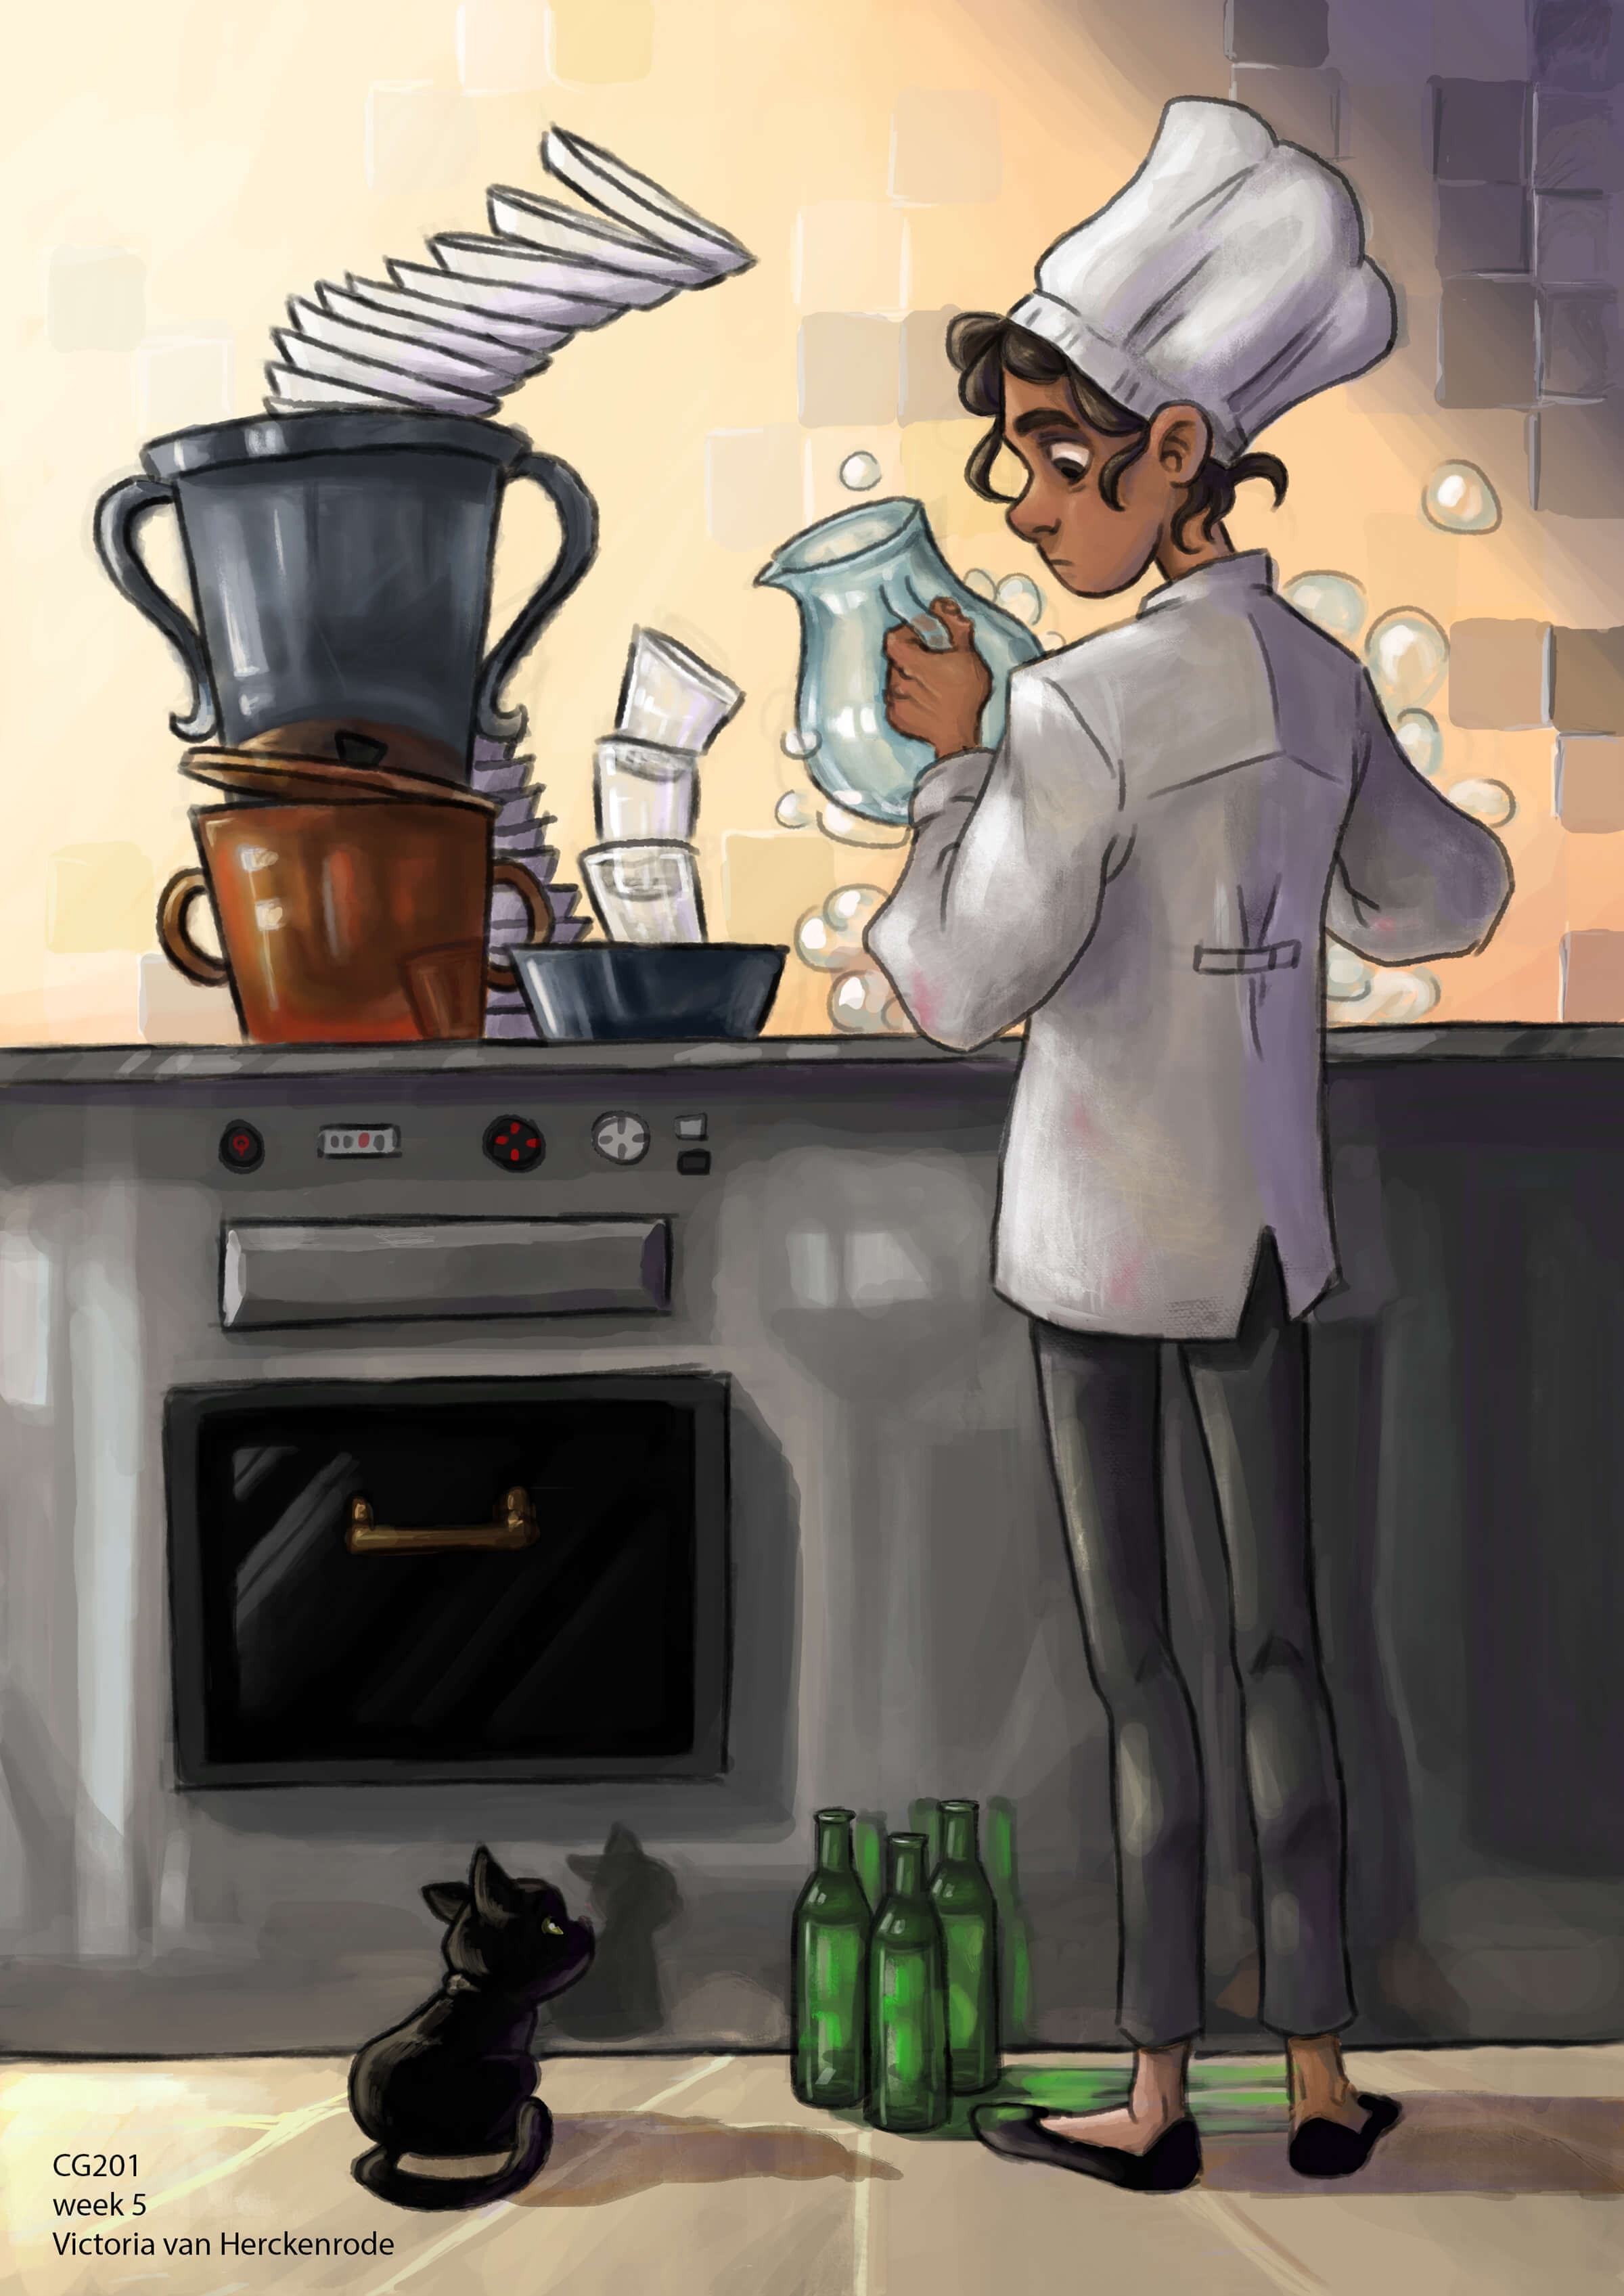 A woman in a chef&#039;s uniform washing dishes next to a tilting stack of plates looks down at a small black kitten.